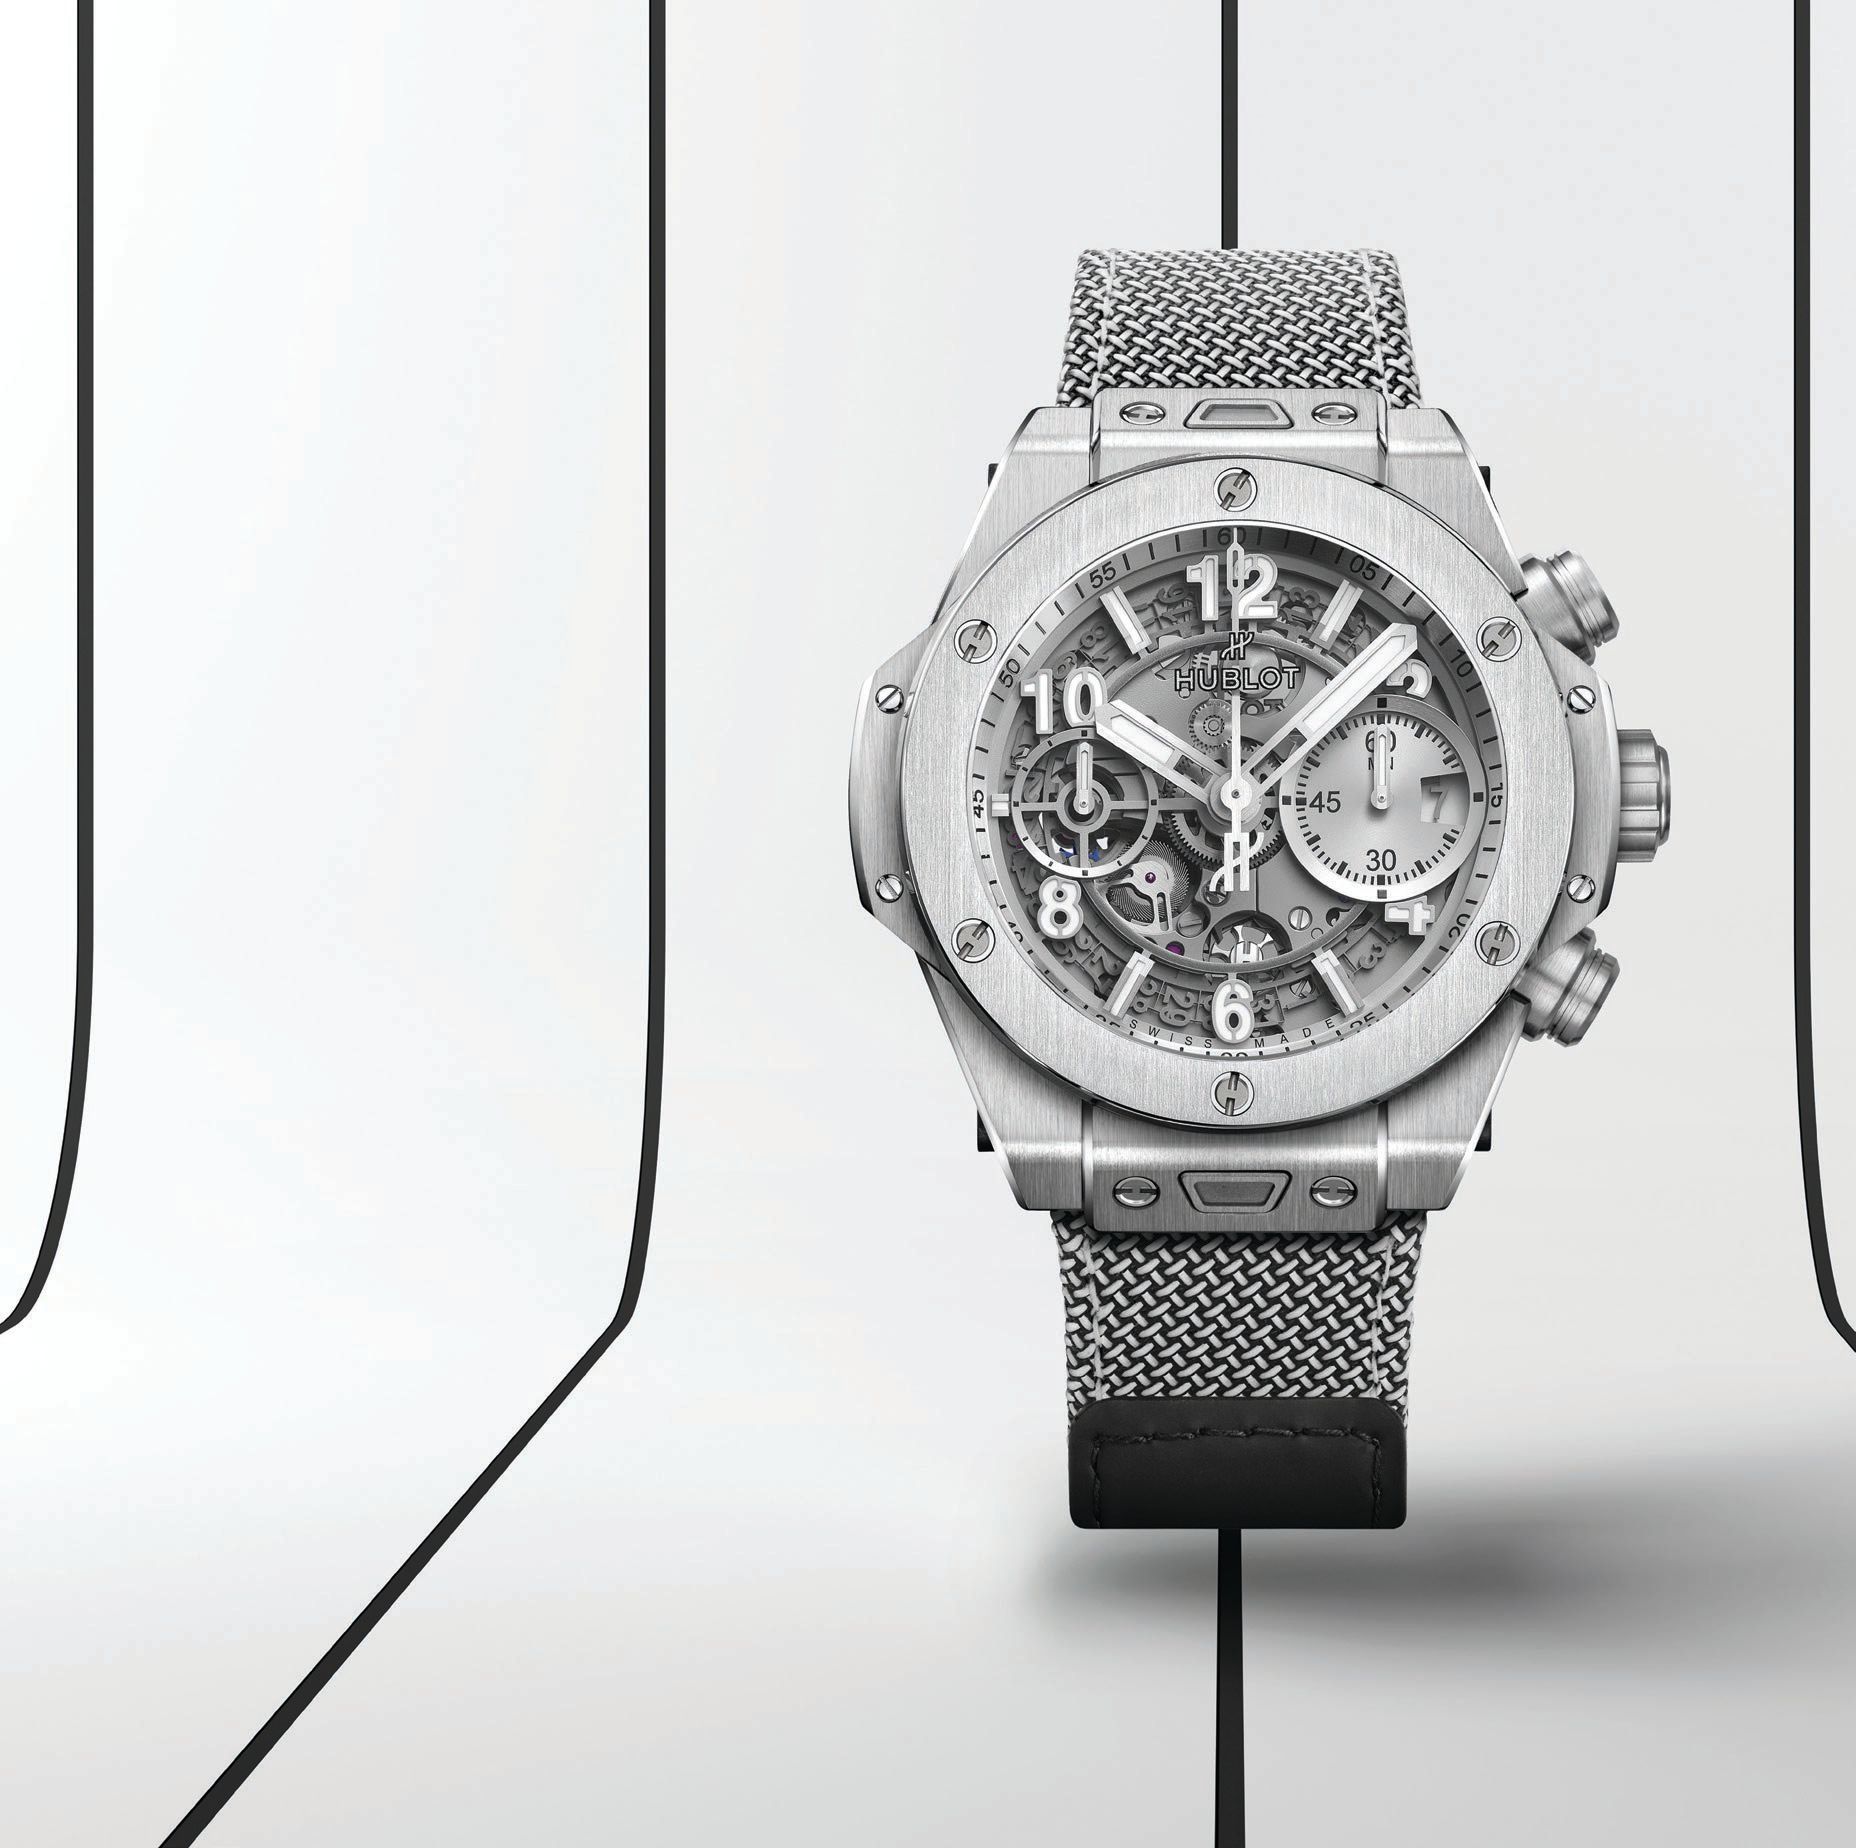 Hublot’s new Big Bang Unico Essential Gray is the first-ever e-commerce-only timepiece released. PHOTO COURTESY OF HUBLOT